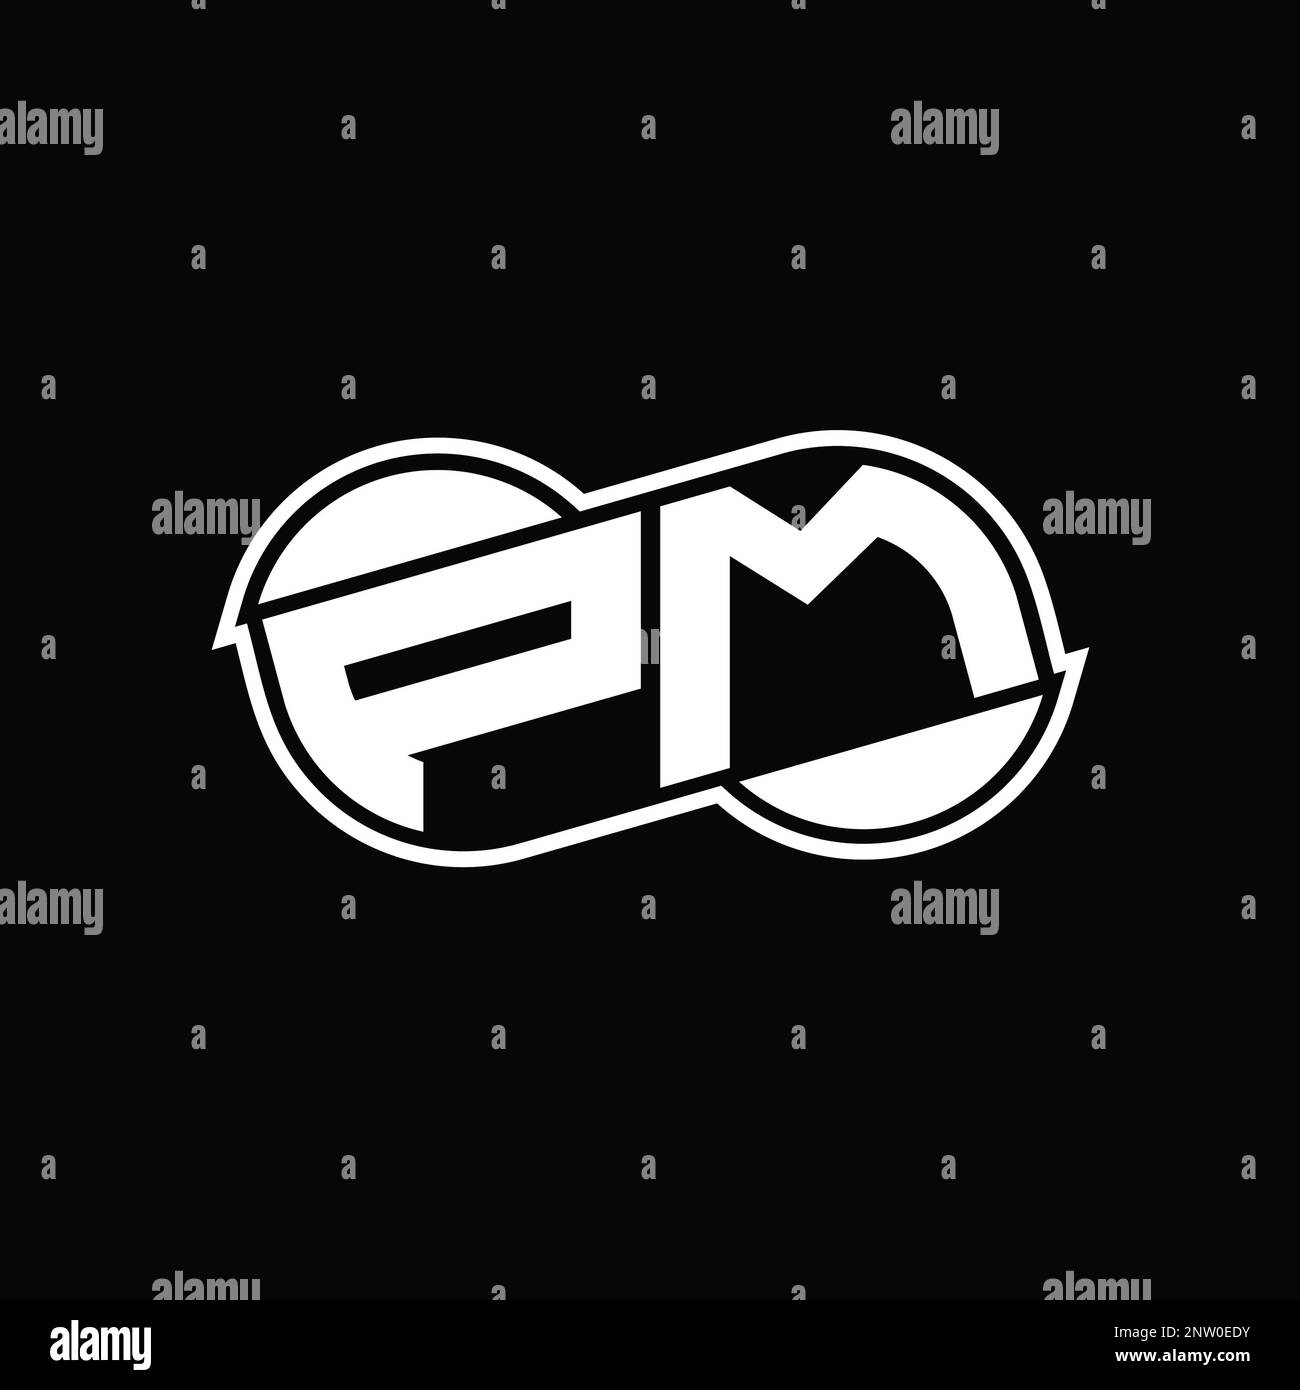 Pm monogram logo with abstract square around Vector Image